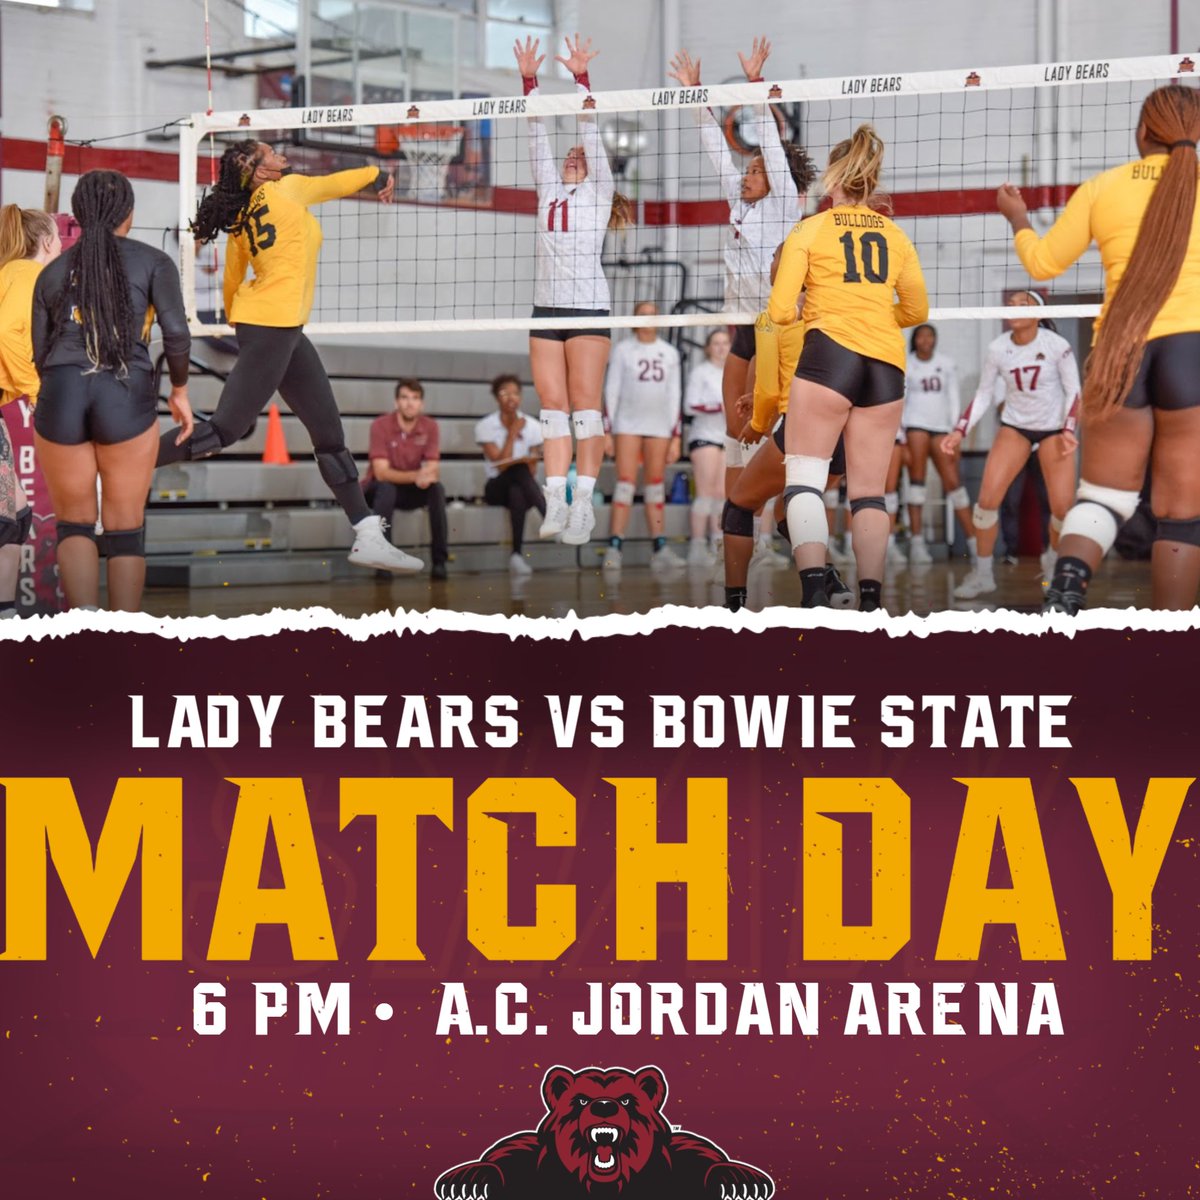 The Lady Bears continue their road trip this evening with a 6 PM match at Bowie State. The match can be seen live here: bit.ly/3DpoQmO #WhateverItTakes | #ShawBears